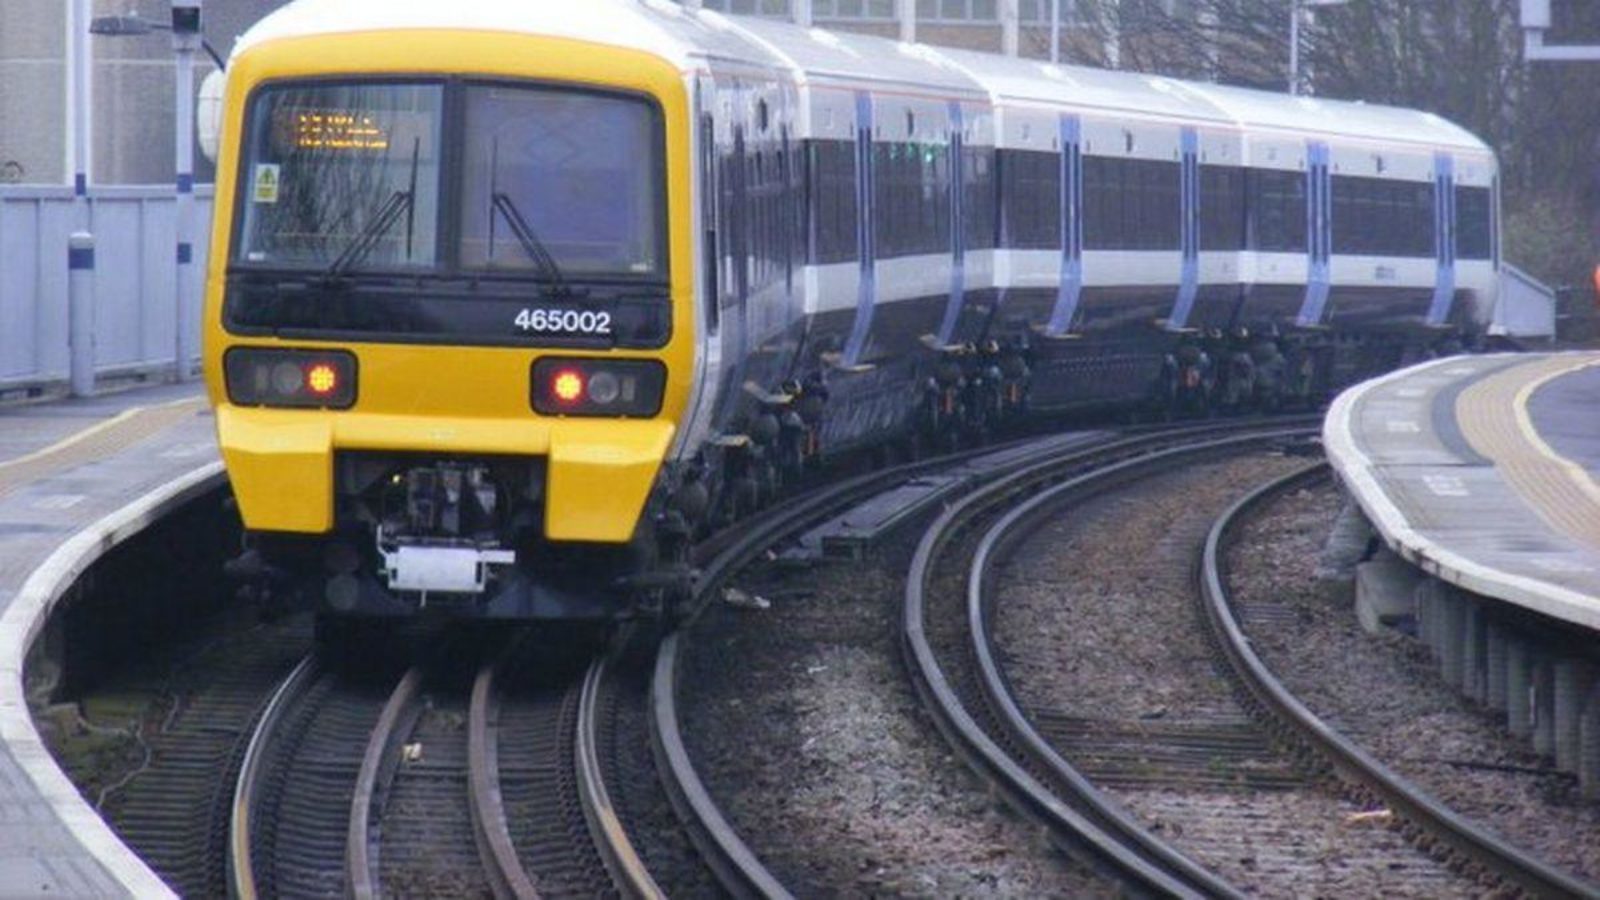 Changes to Southeastern timetable from Dec 2022